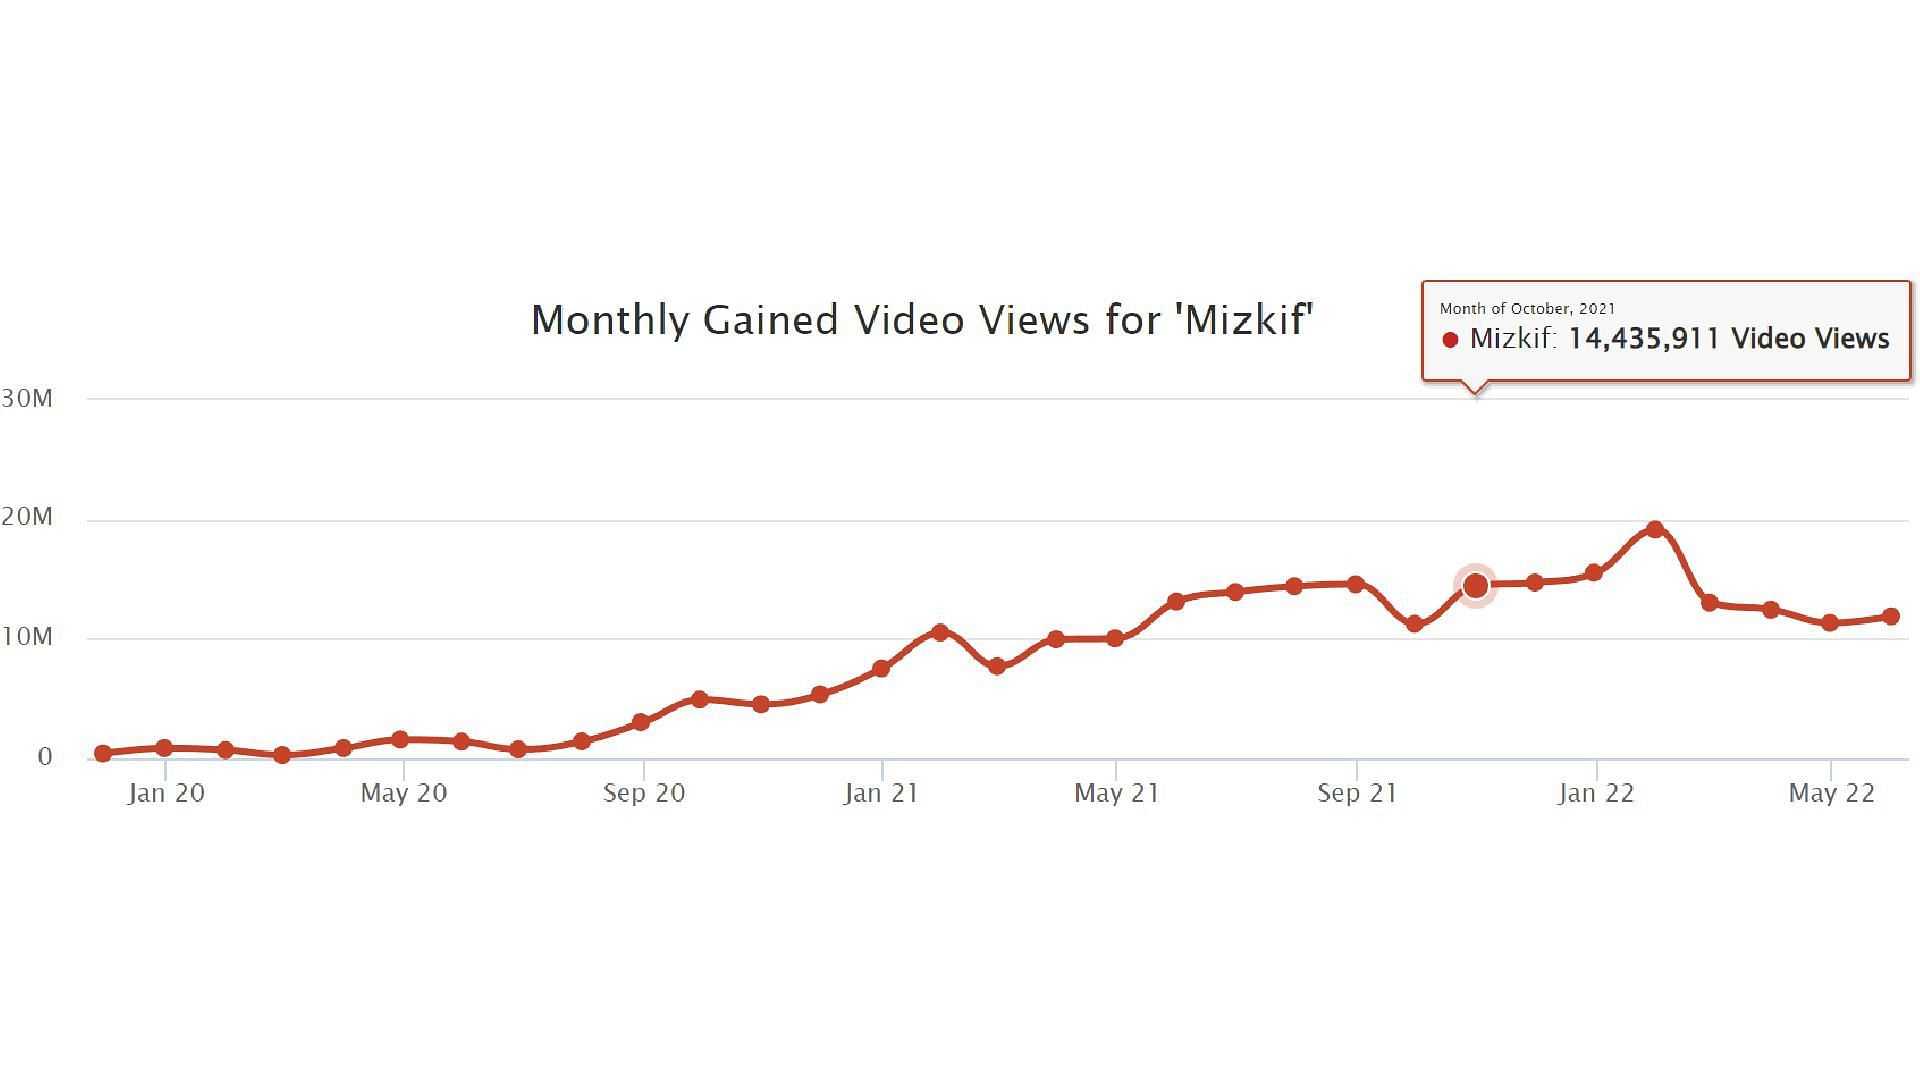 His view count over the years. (Image via SocialBlade)